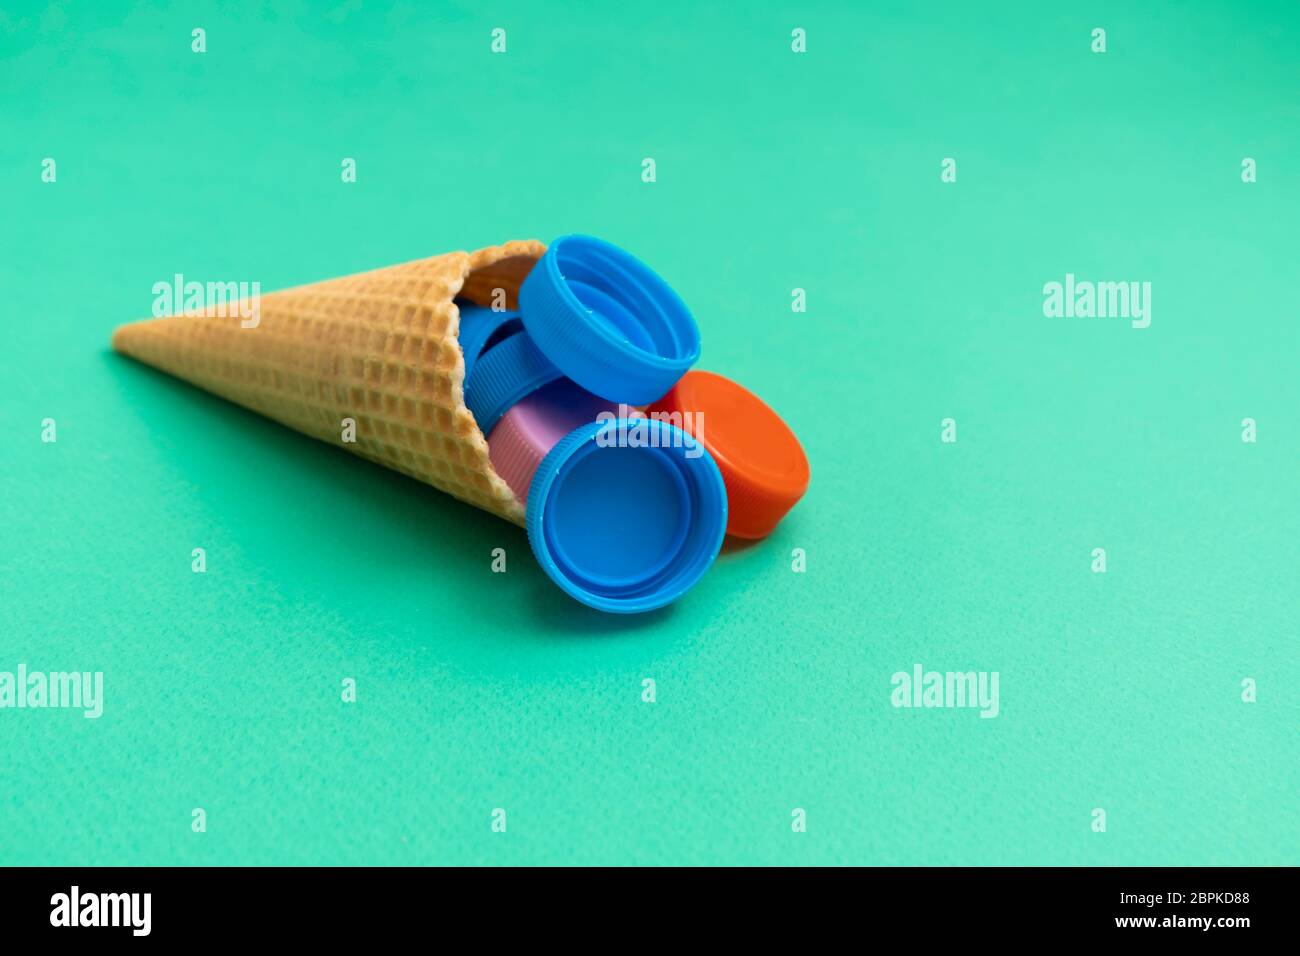 Plastic free and unnatural plastic food concept. Waffle cone with plastic bottle caps on green background Stock Photo